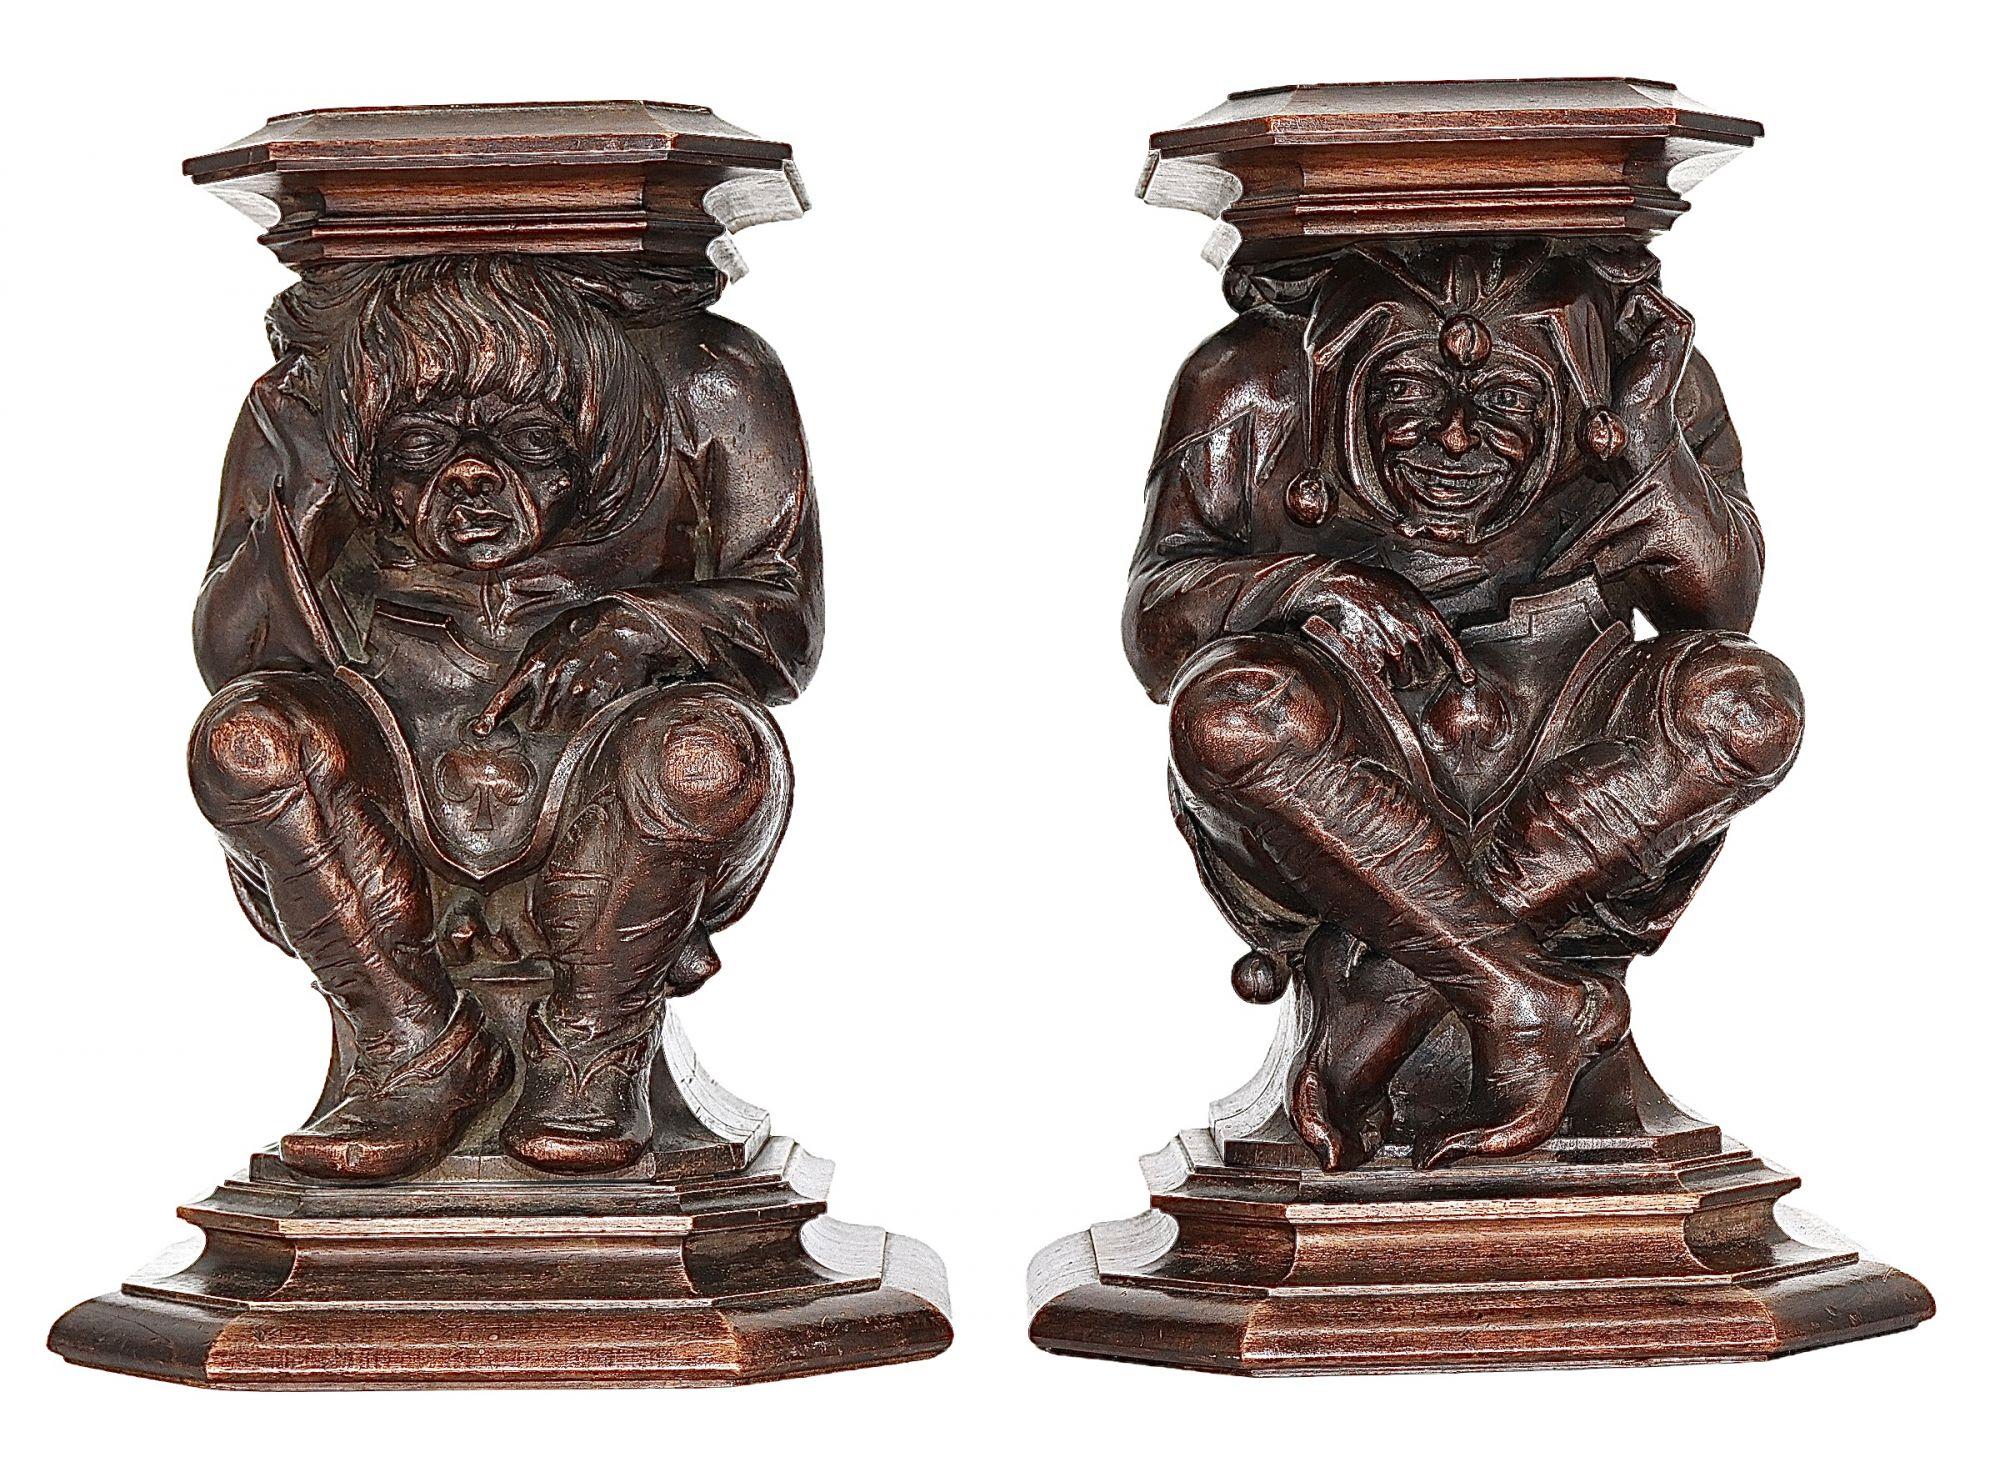 A very large and fine pair of 18th century carved figures, of Court Jesters. These gentlemen have been superbly carved in the finest detail, they original came from a piece of early 18th Century Furniture.Both the characters have finely detailed